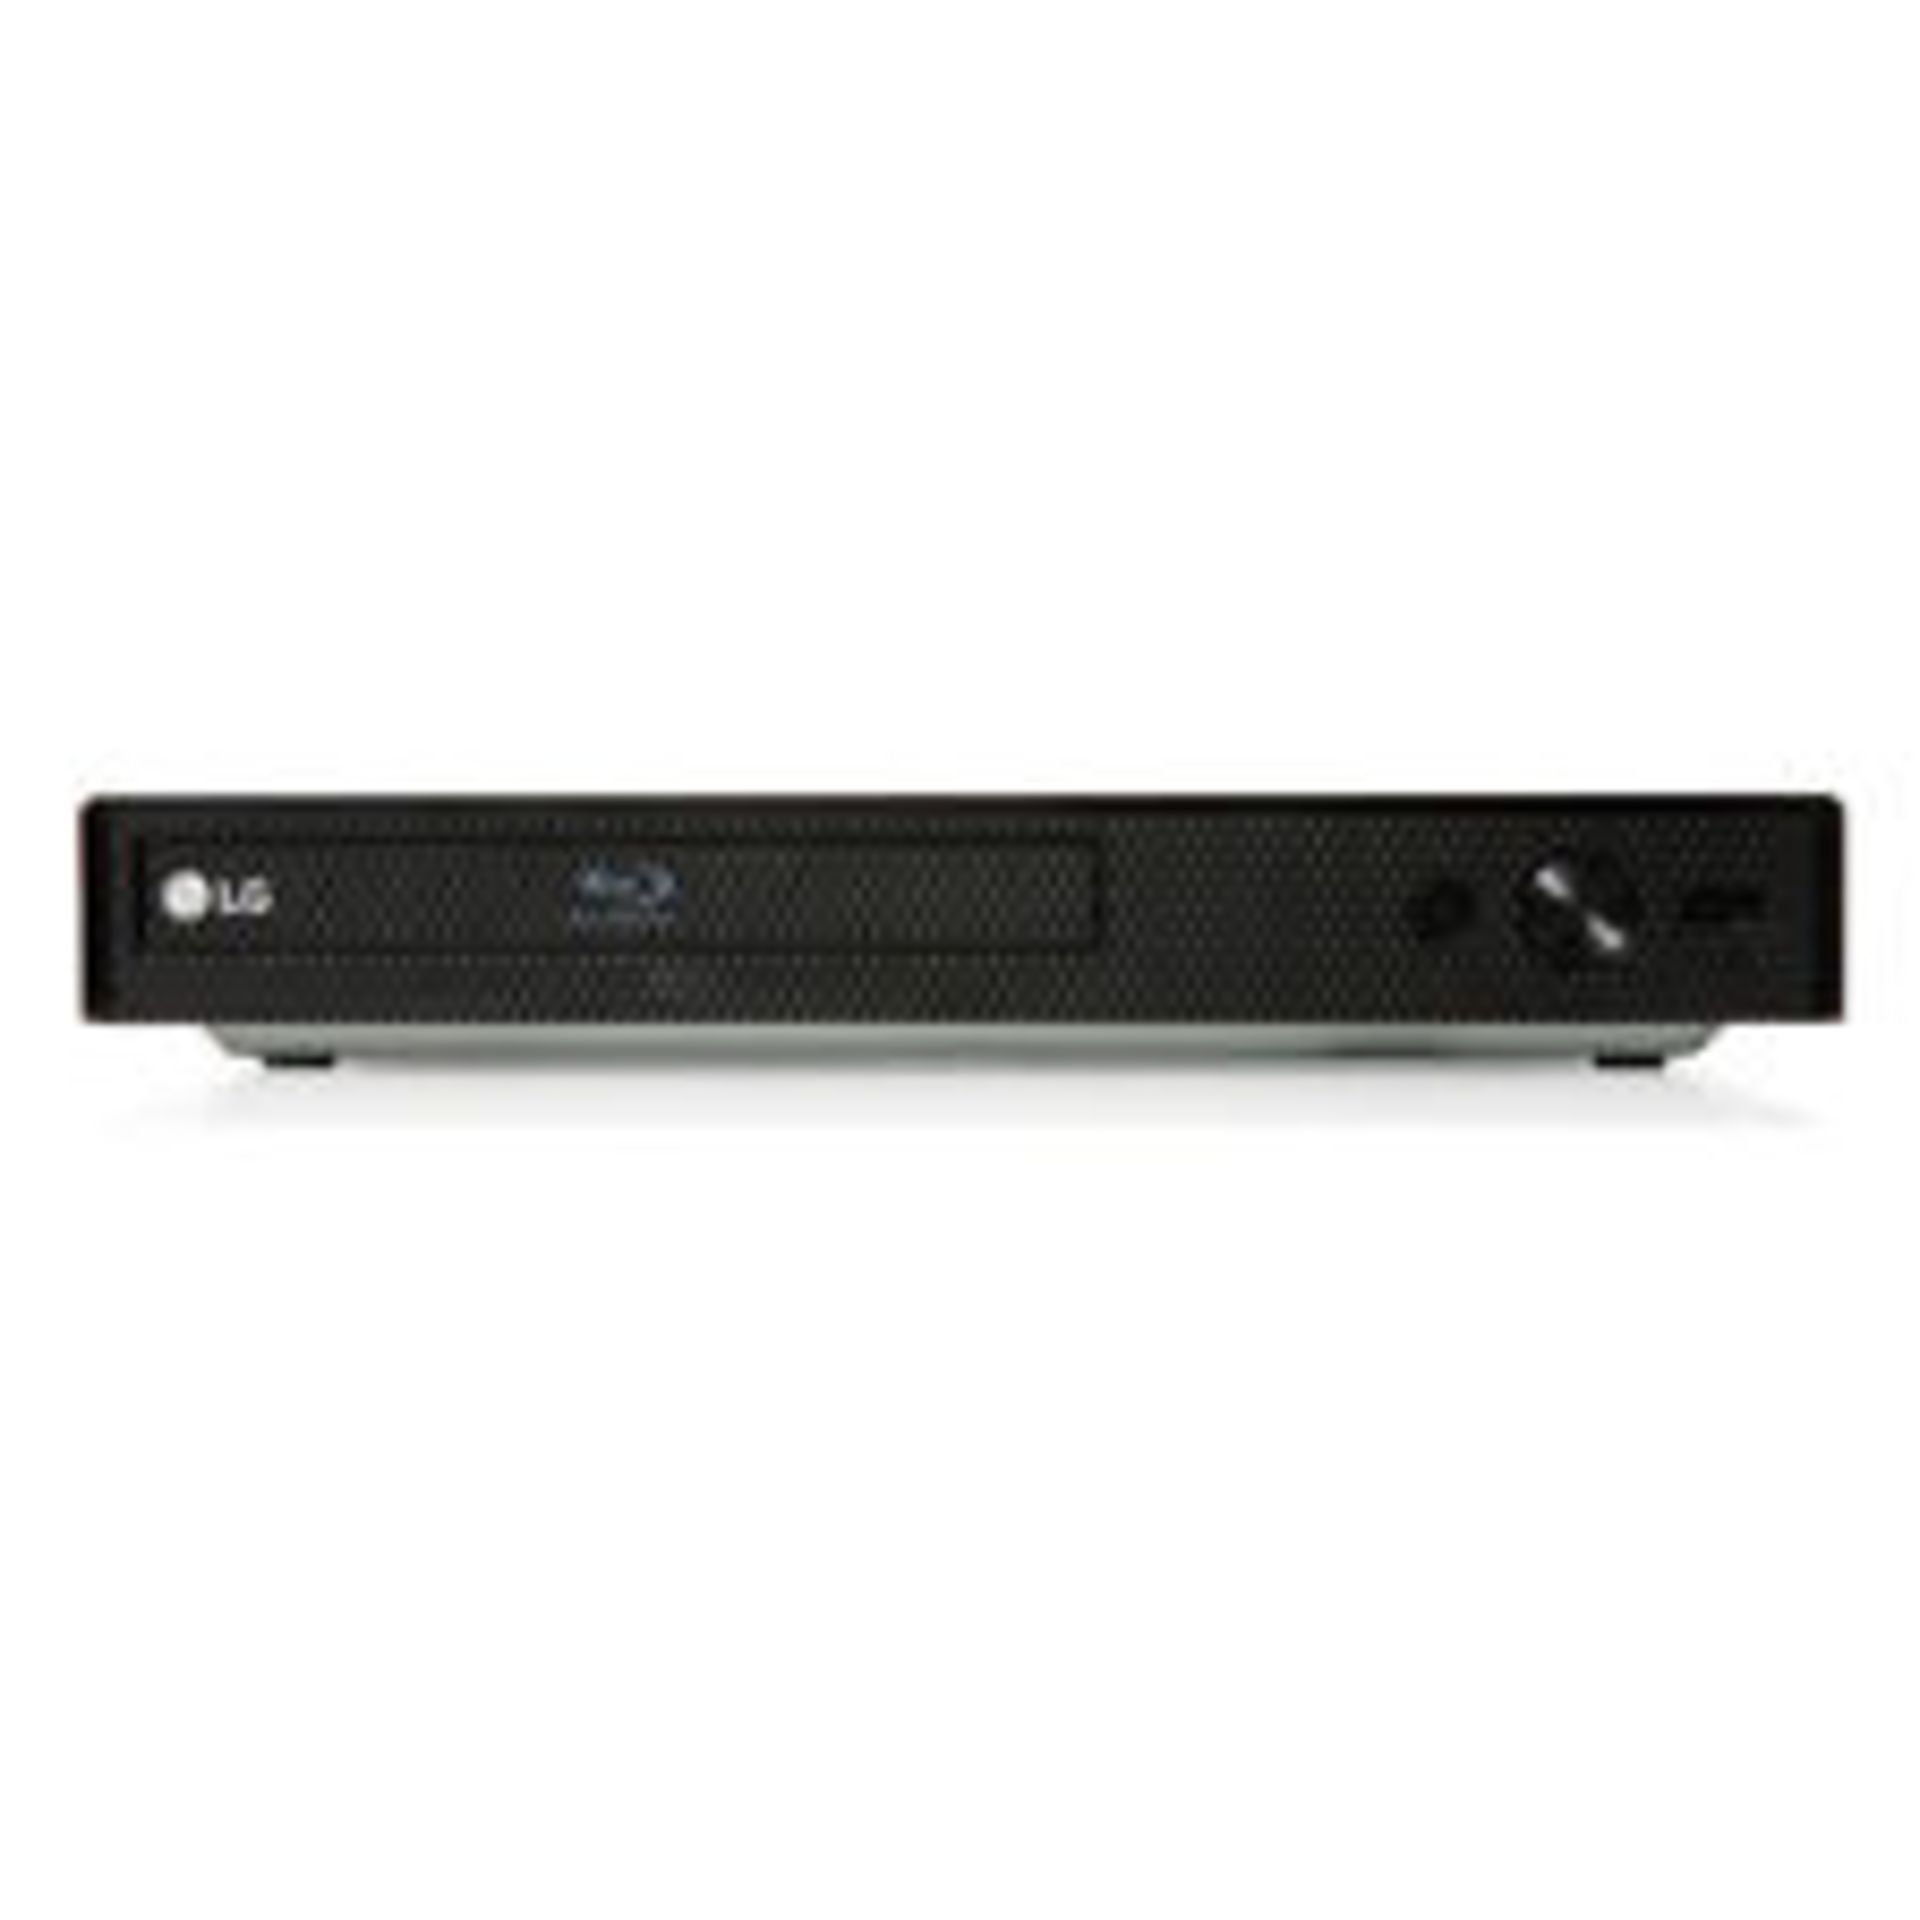 + VAT Grade B LG BP340 Blu-Ray Disc Player With Built In Wi-Fi